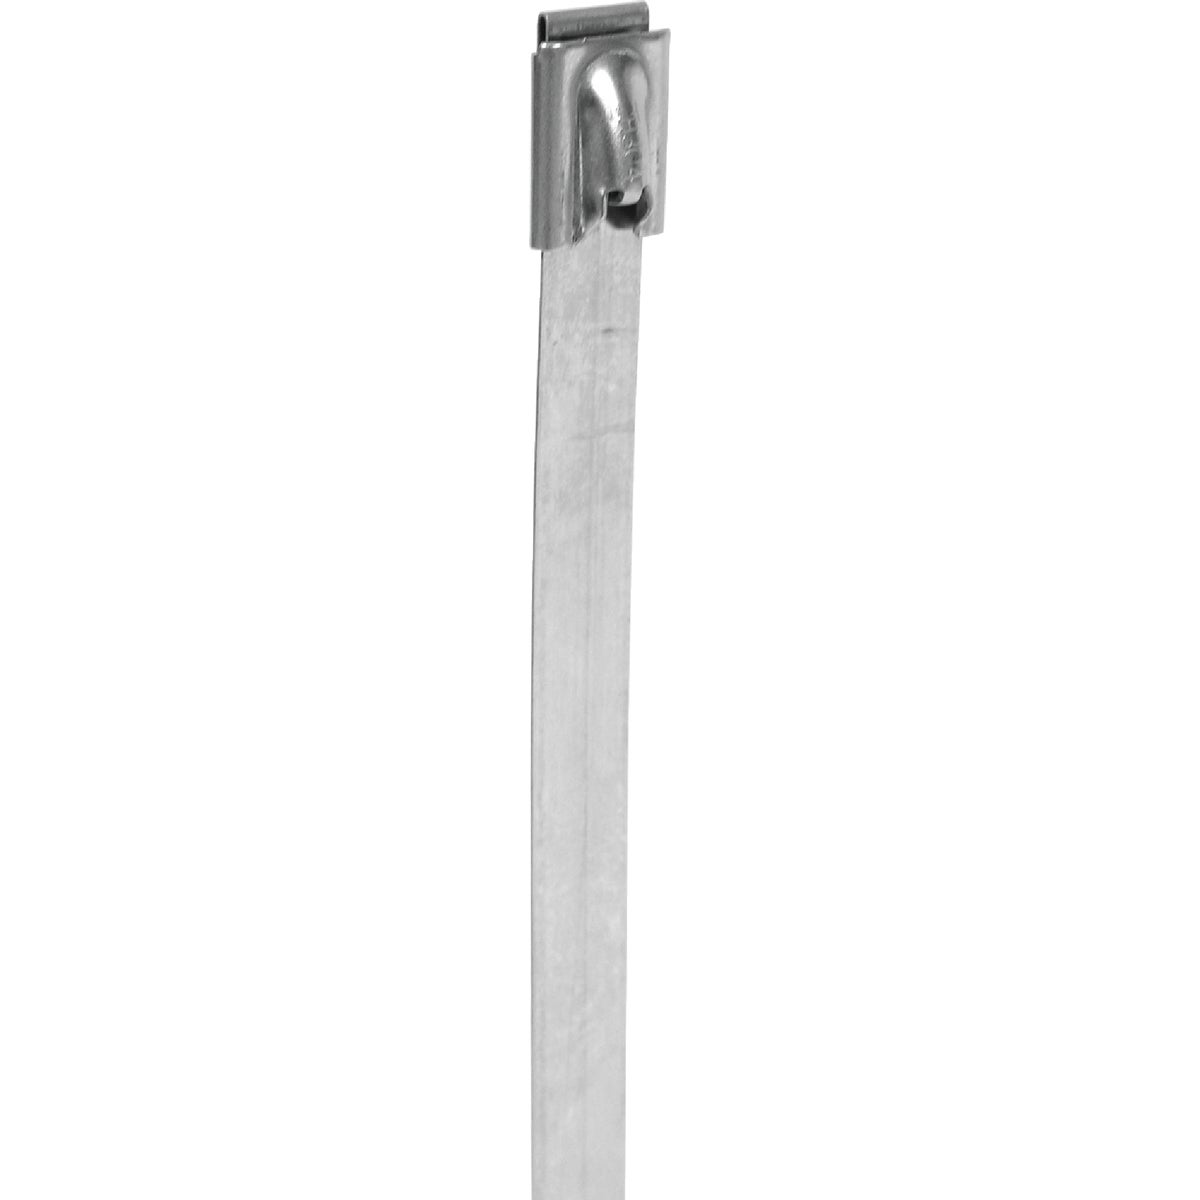 Item 523188, Stainless steel cable tie designed for harsh, corrosive, and salt-water 